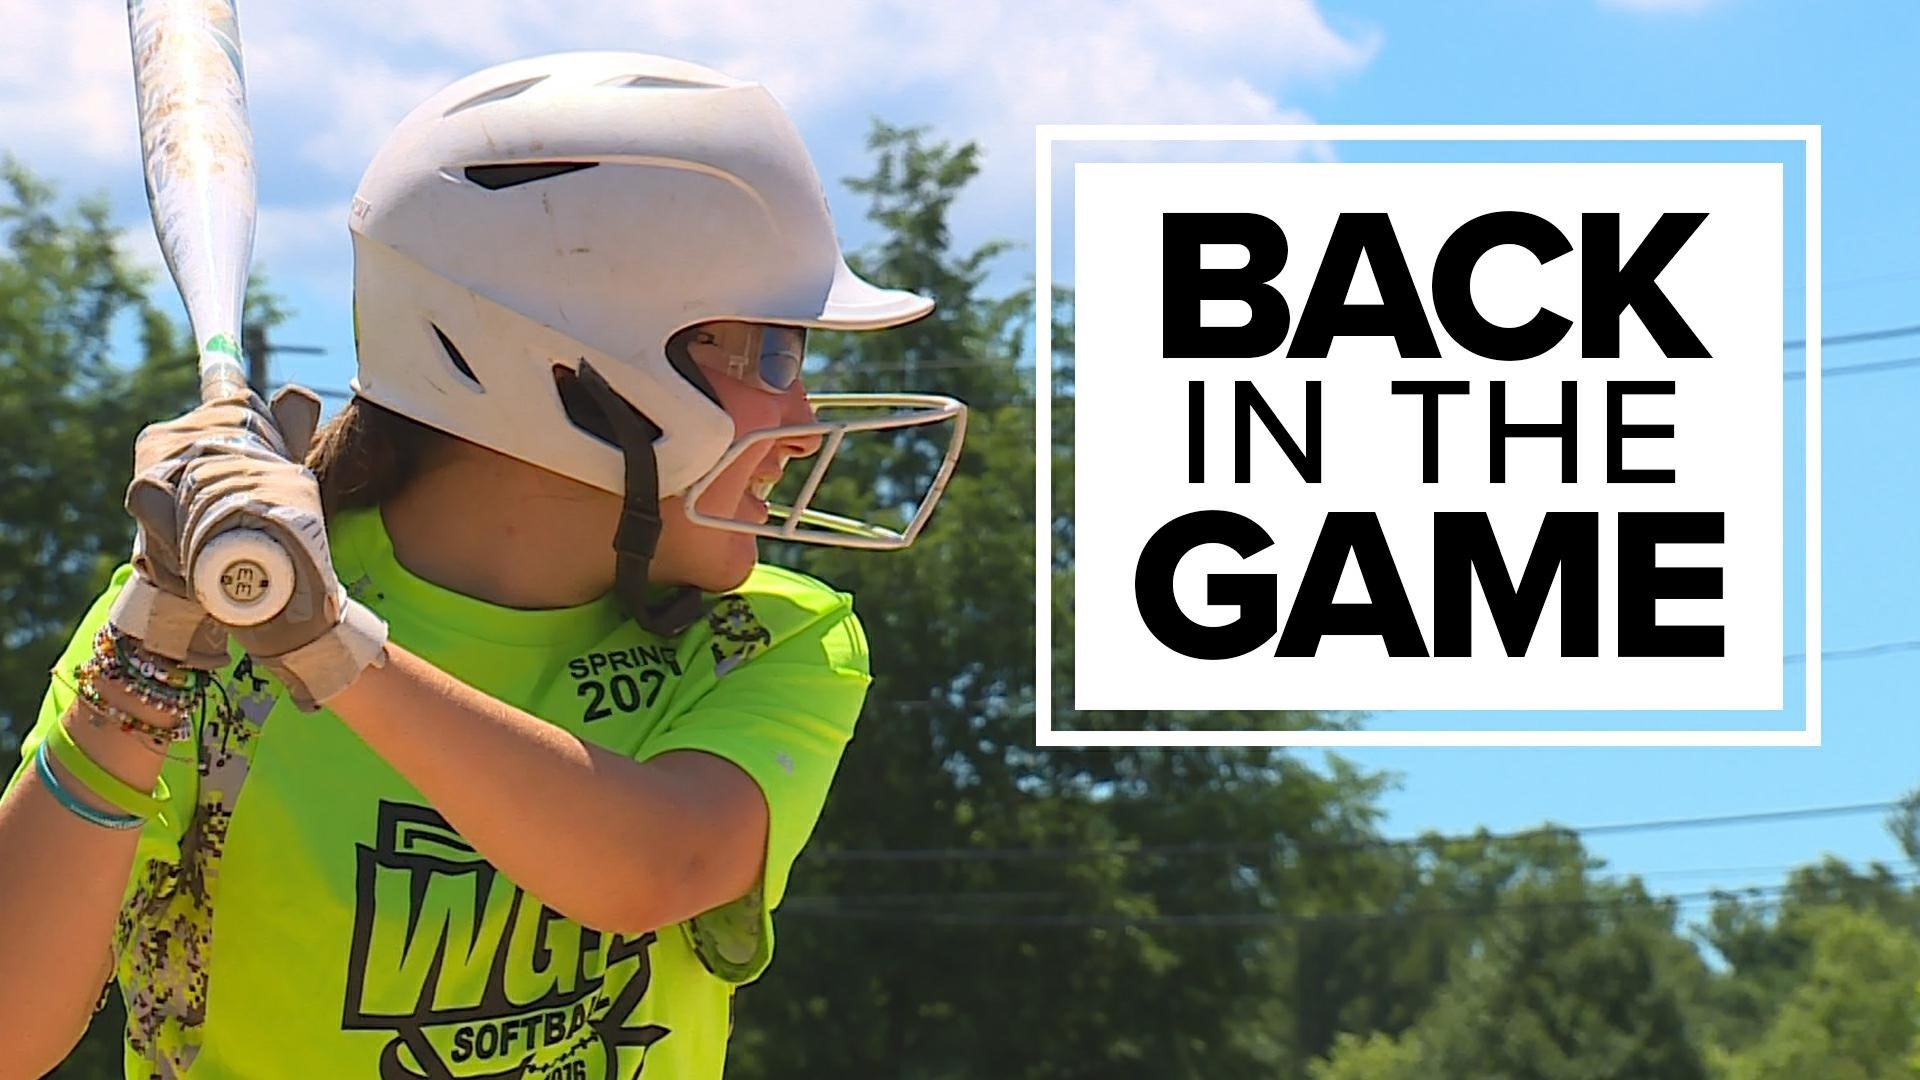 The soon-to-be Lyman Hall High School senior had a benign tumor. With the tumor out now, she has a plan to continue softball.